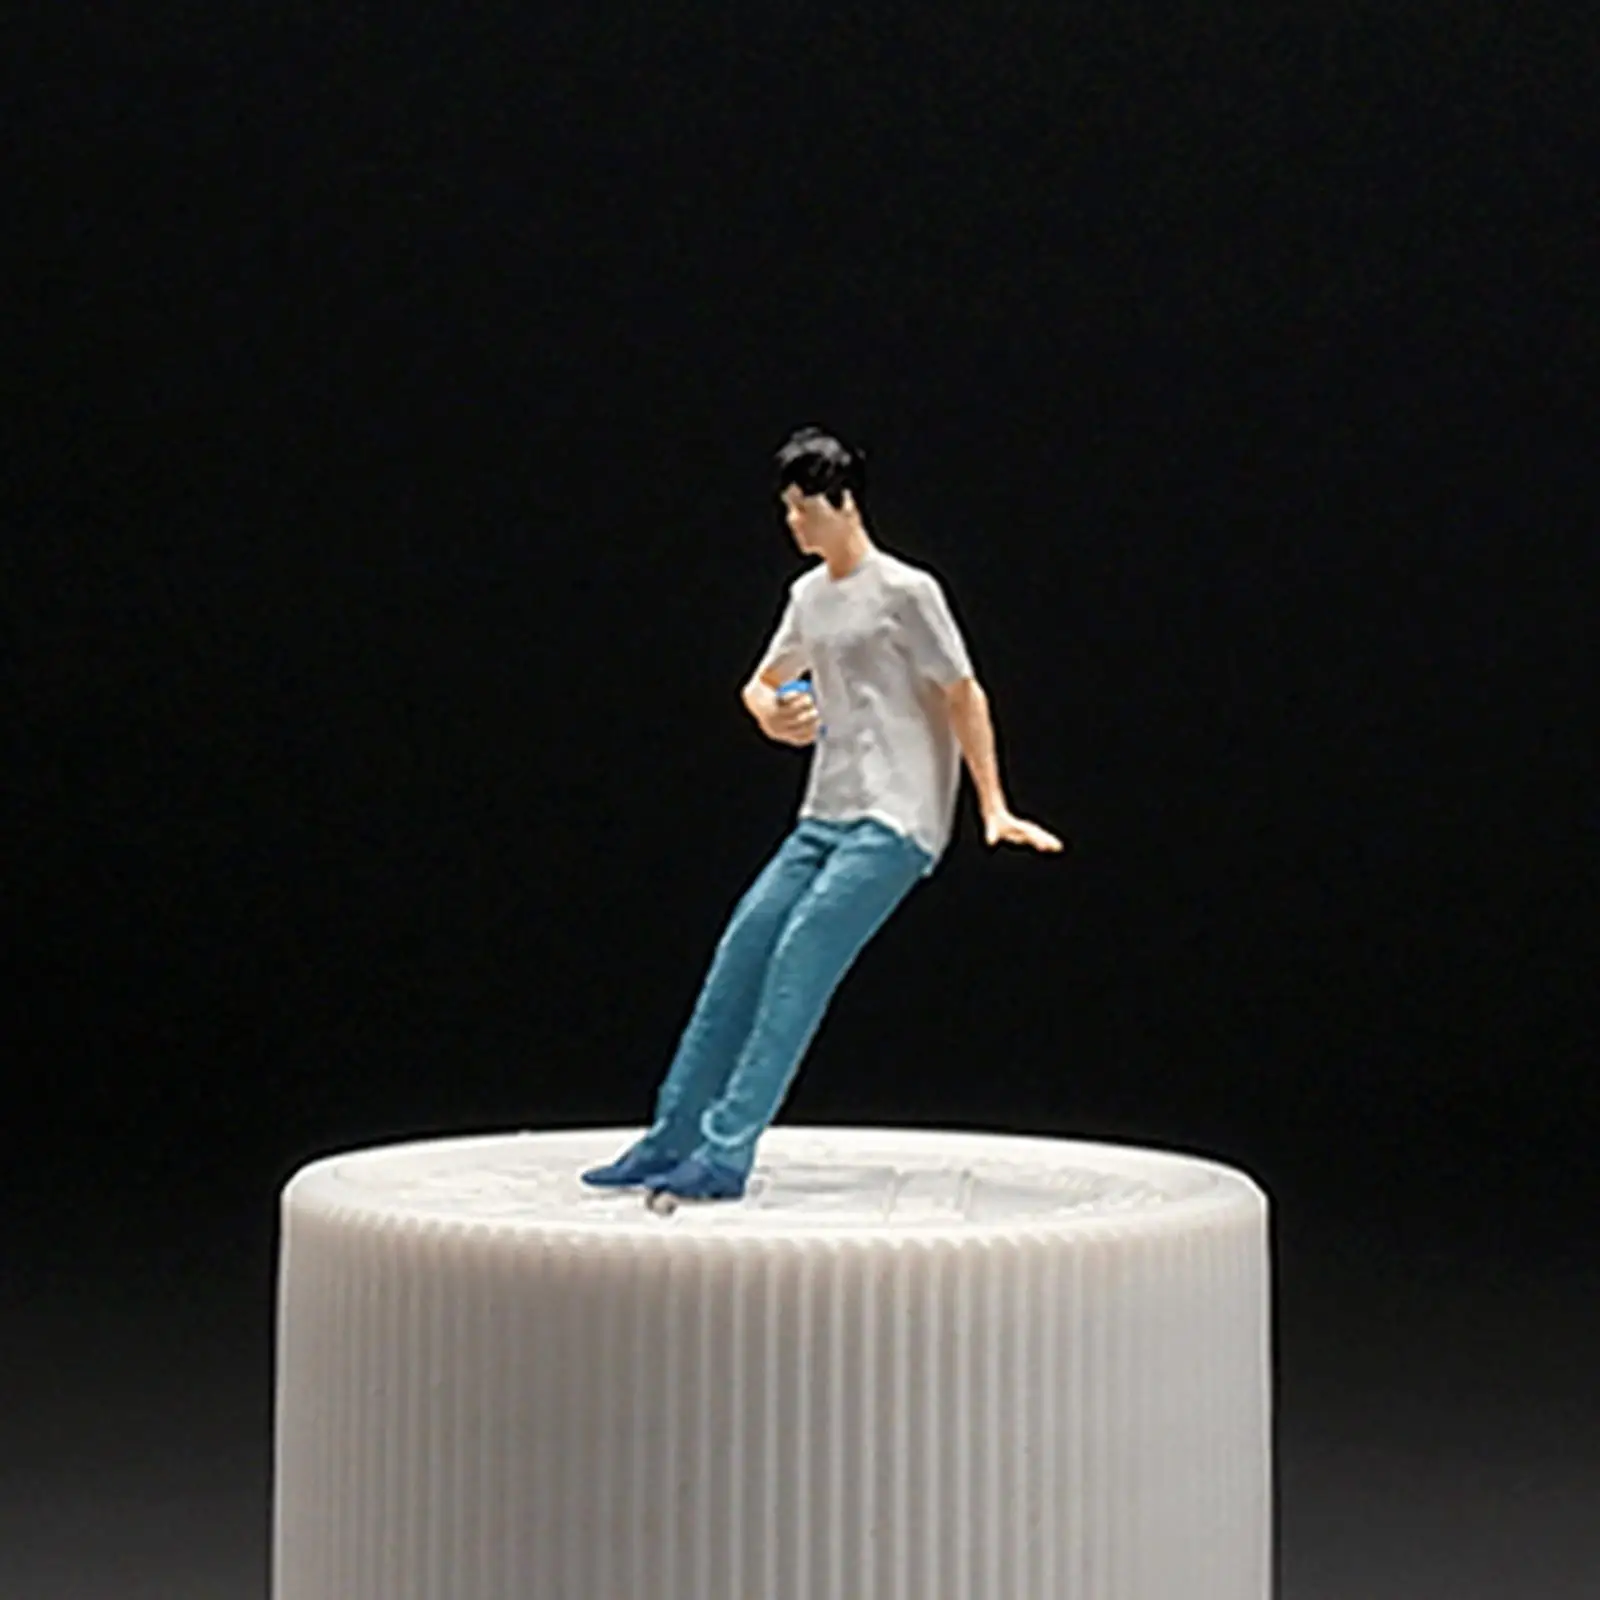 Resin 1/64 People Figures Crafts for DIY Scene Photography Props Sand Table